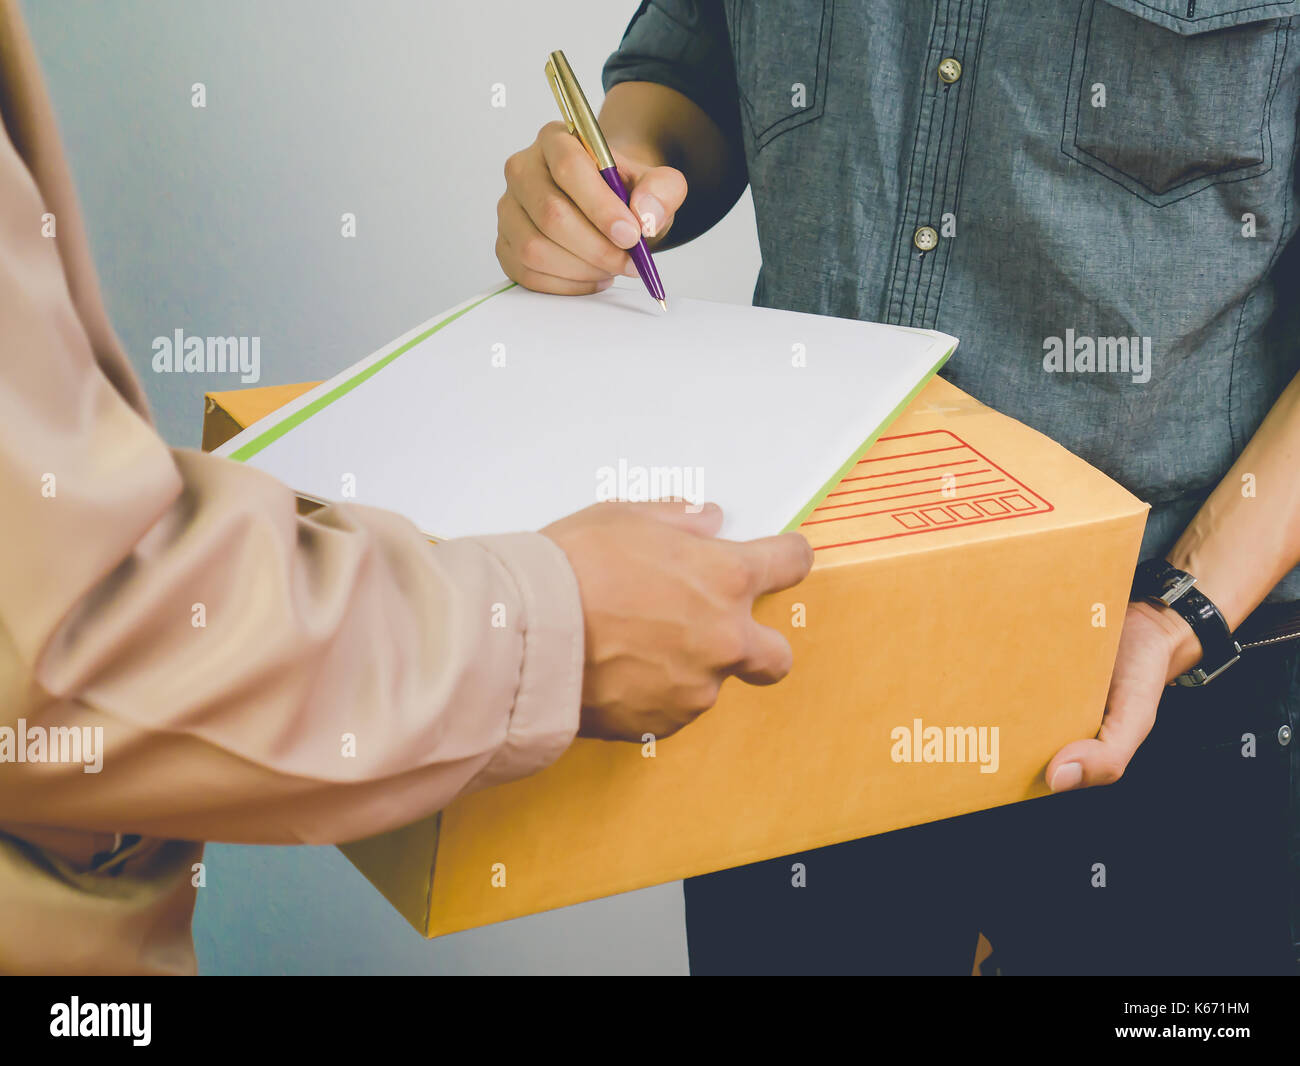 Man accepting a delivery of cardboard boxes from deliveryman Stock Photo